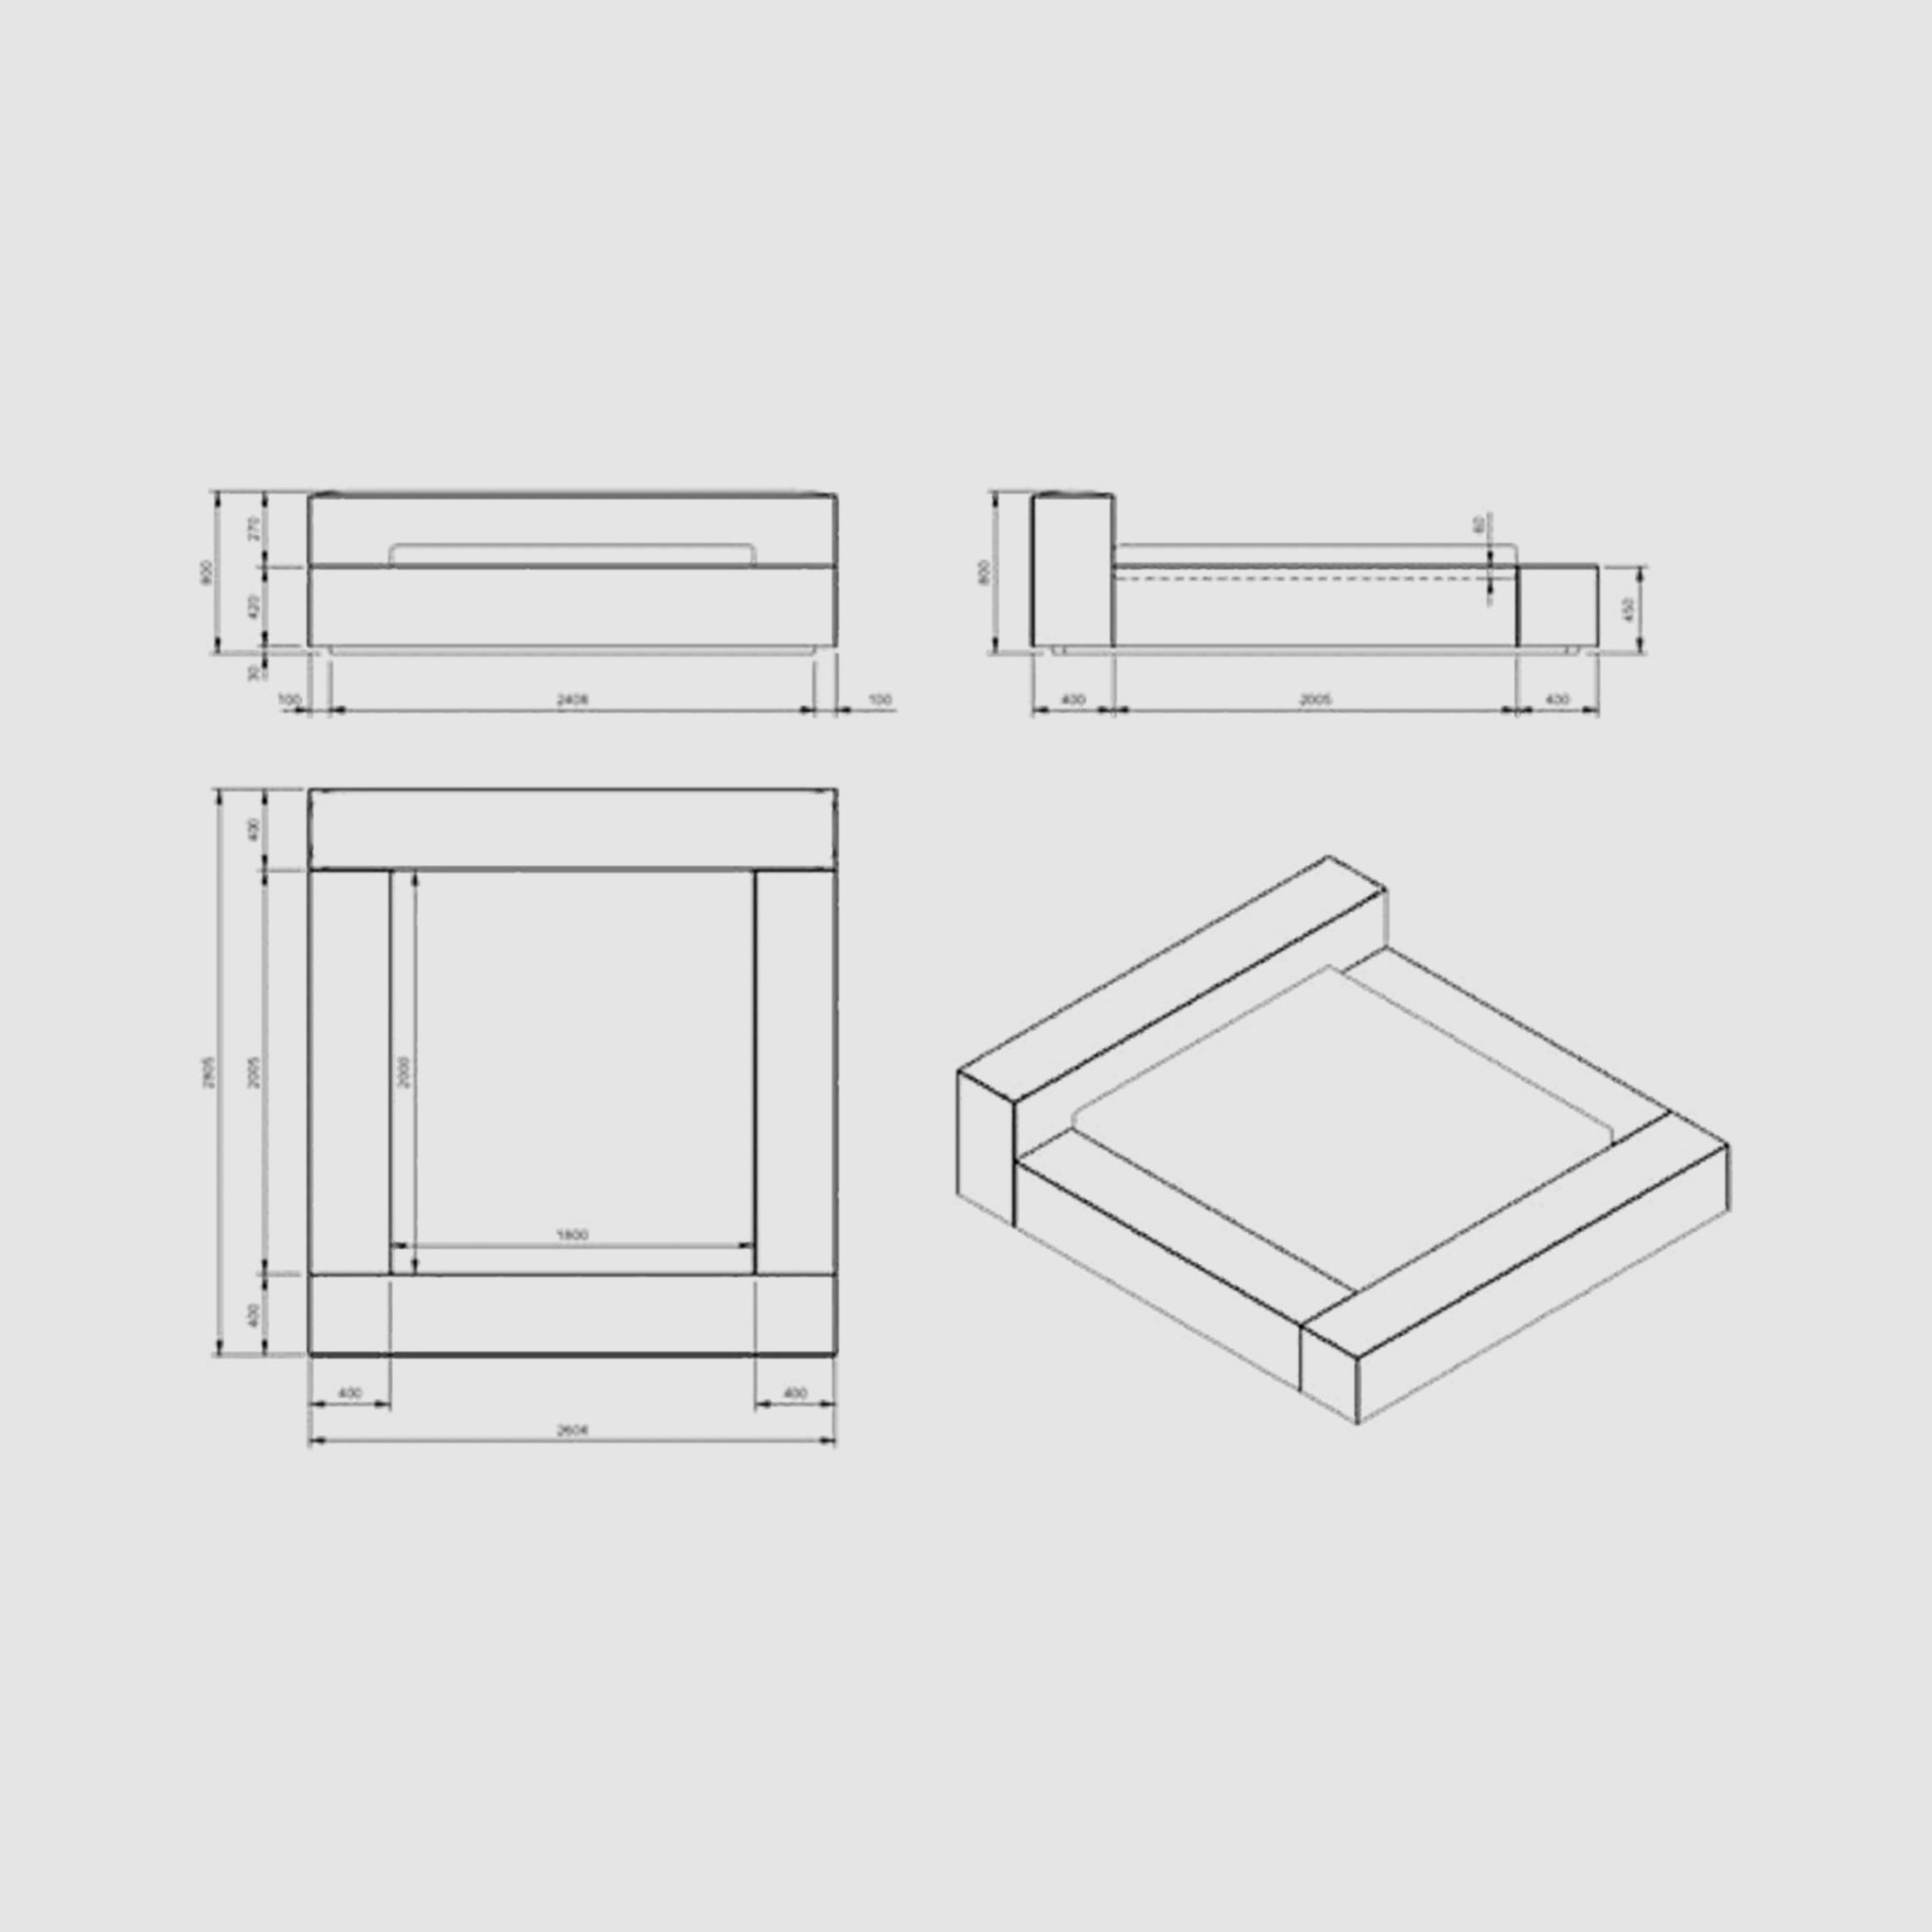 Technical drawing of a cardboard box with dimensions 2408 x 1800. Precise measurements for packaging design.